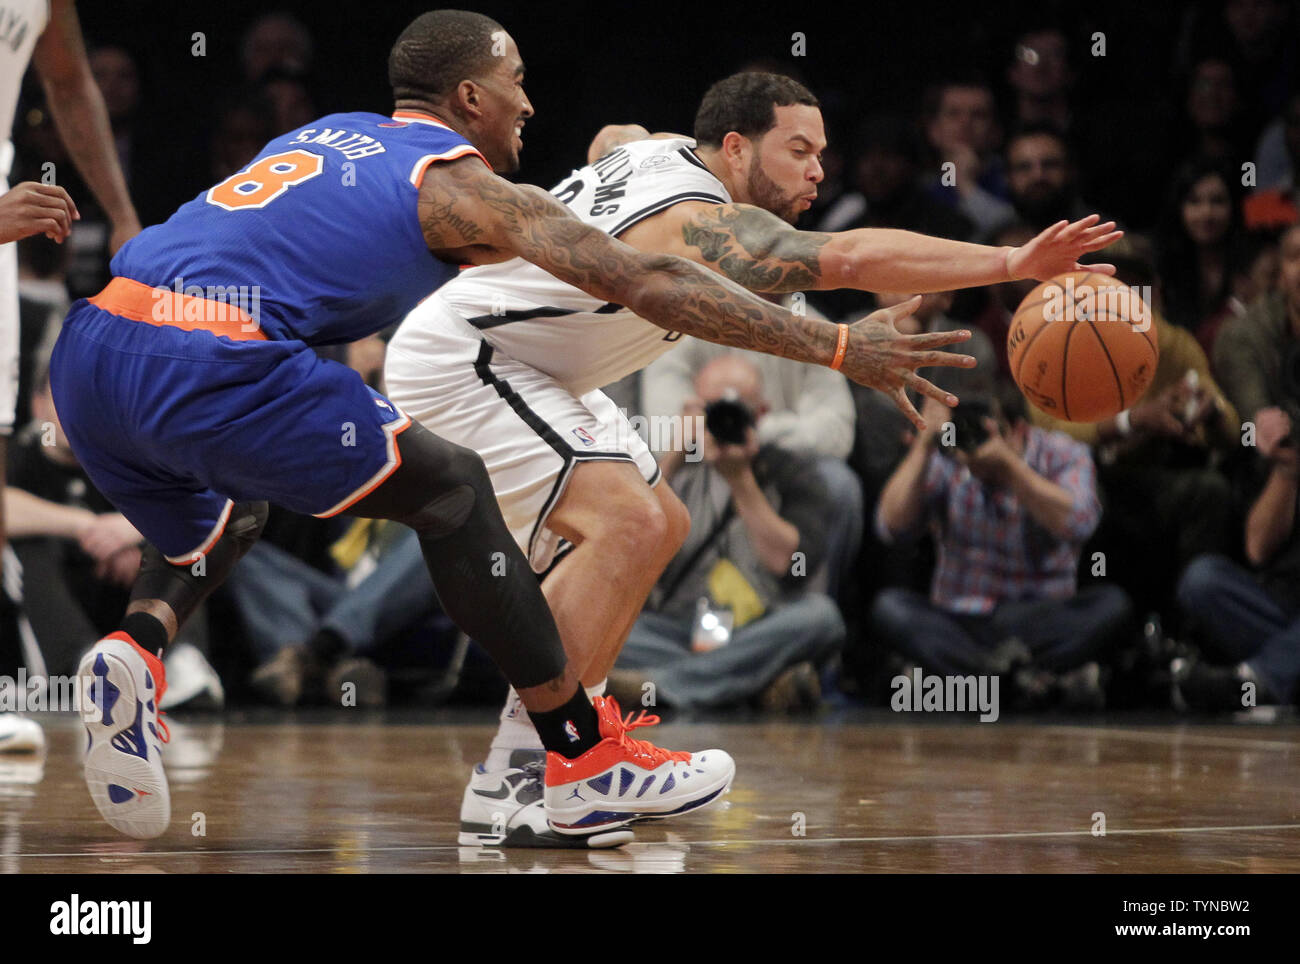 Brooklyn Nets Deron Williams and New York Knicks J.R. Smith reach for a loose ball in the second quarter at the Barclays Center in New York City on December 11, 2012.   UPI/John Angelillo Stock Photo